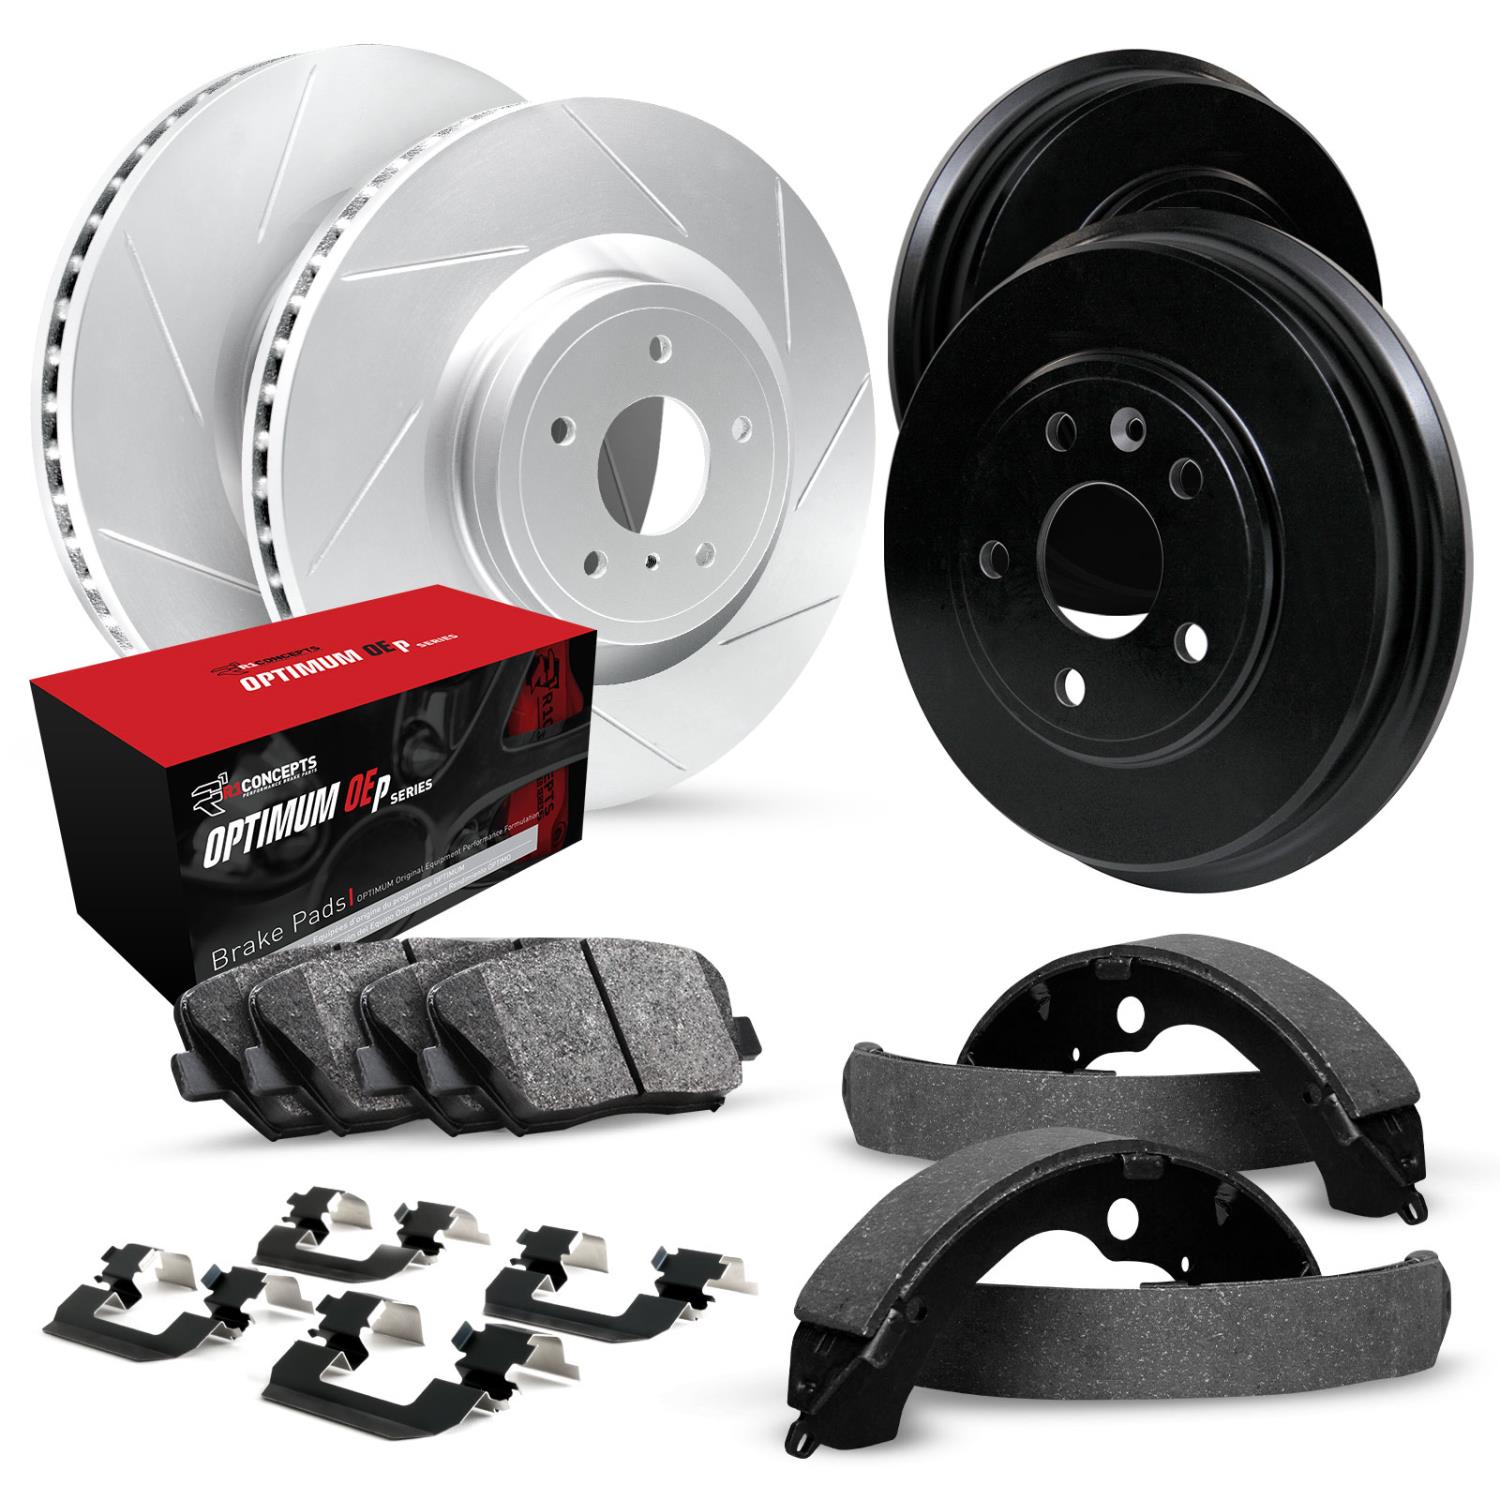 GEO-Carbon Slotted Brake Rotor & Drum Set w/Optimum OE Pads, Shoes, & Hardware, 1986-1993 Ford/Lincoln/Mercury/Mazda